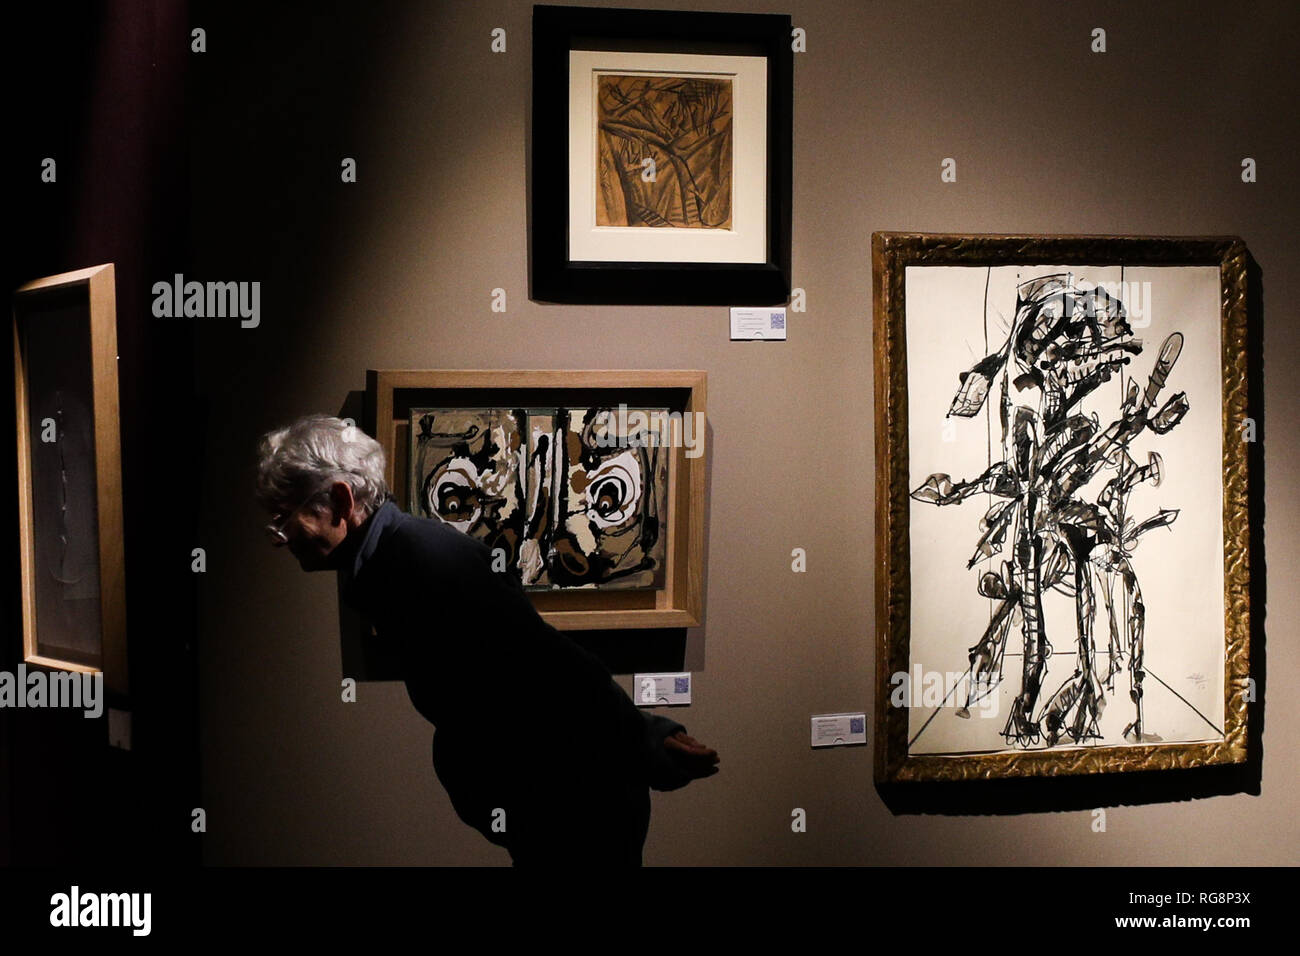 Beijing, A total of 133 Belgian and international galleries presented tens of thousands of art pieces at the fair. 3rd Feb, 2019. A visitor views exhibits from Simon Studer Art during the 64th Brafa Art Fair at the Tour & Taxis in Brussels, Belgium, Jan. 28, 2019. A total of 133 Belgian and international galleries presented tens of thousands of art pieces at the fair, which will last till Feb. 3, 2019. Created in 1956, the Brafa Art Fair is one of the world's oldest and most prestigious art fairs. Credit: Zheng Huansong/Xinhua/Alamy Live News Stock Photo